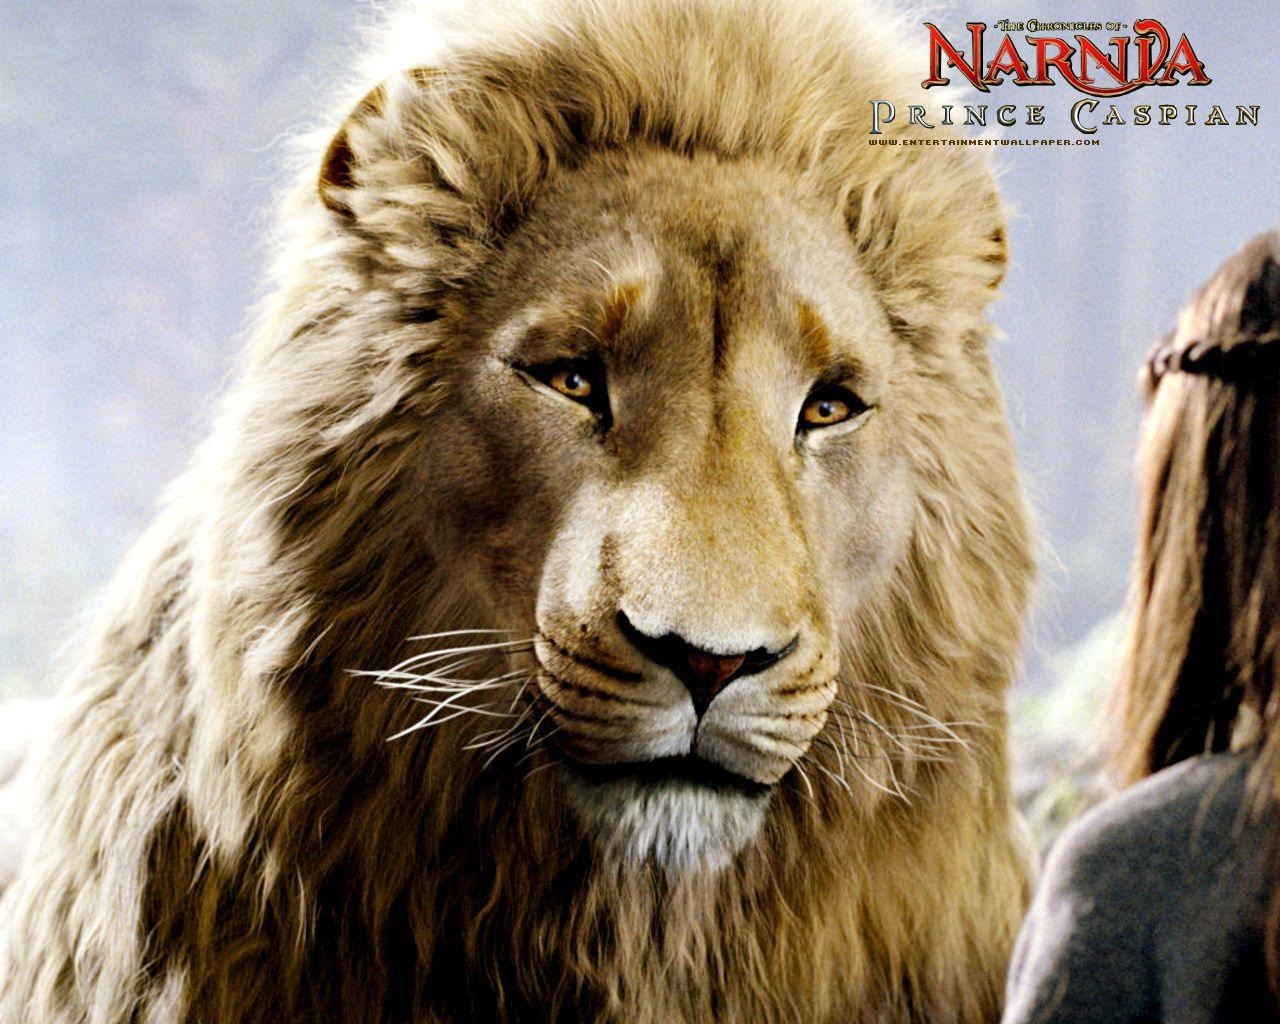 The Chronicles of Narnia 2: Prince Caspian #5 - 1280x1024